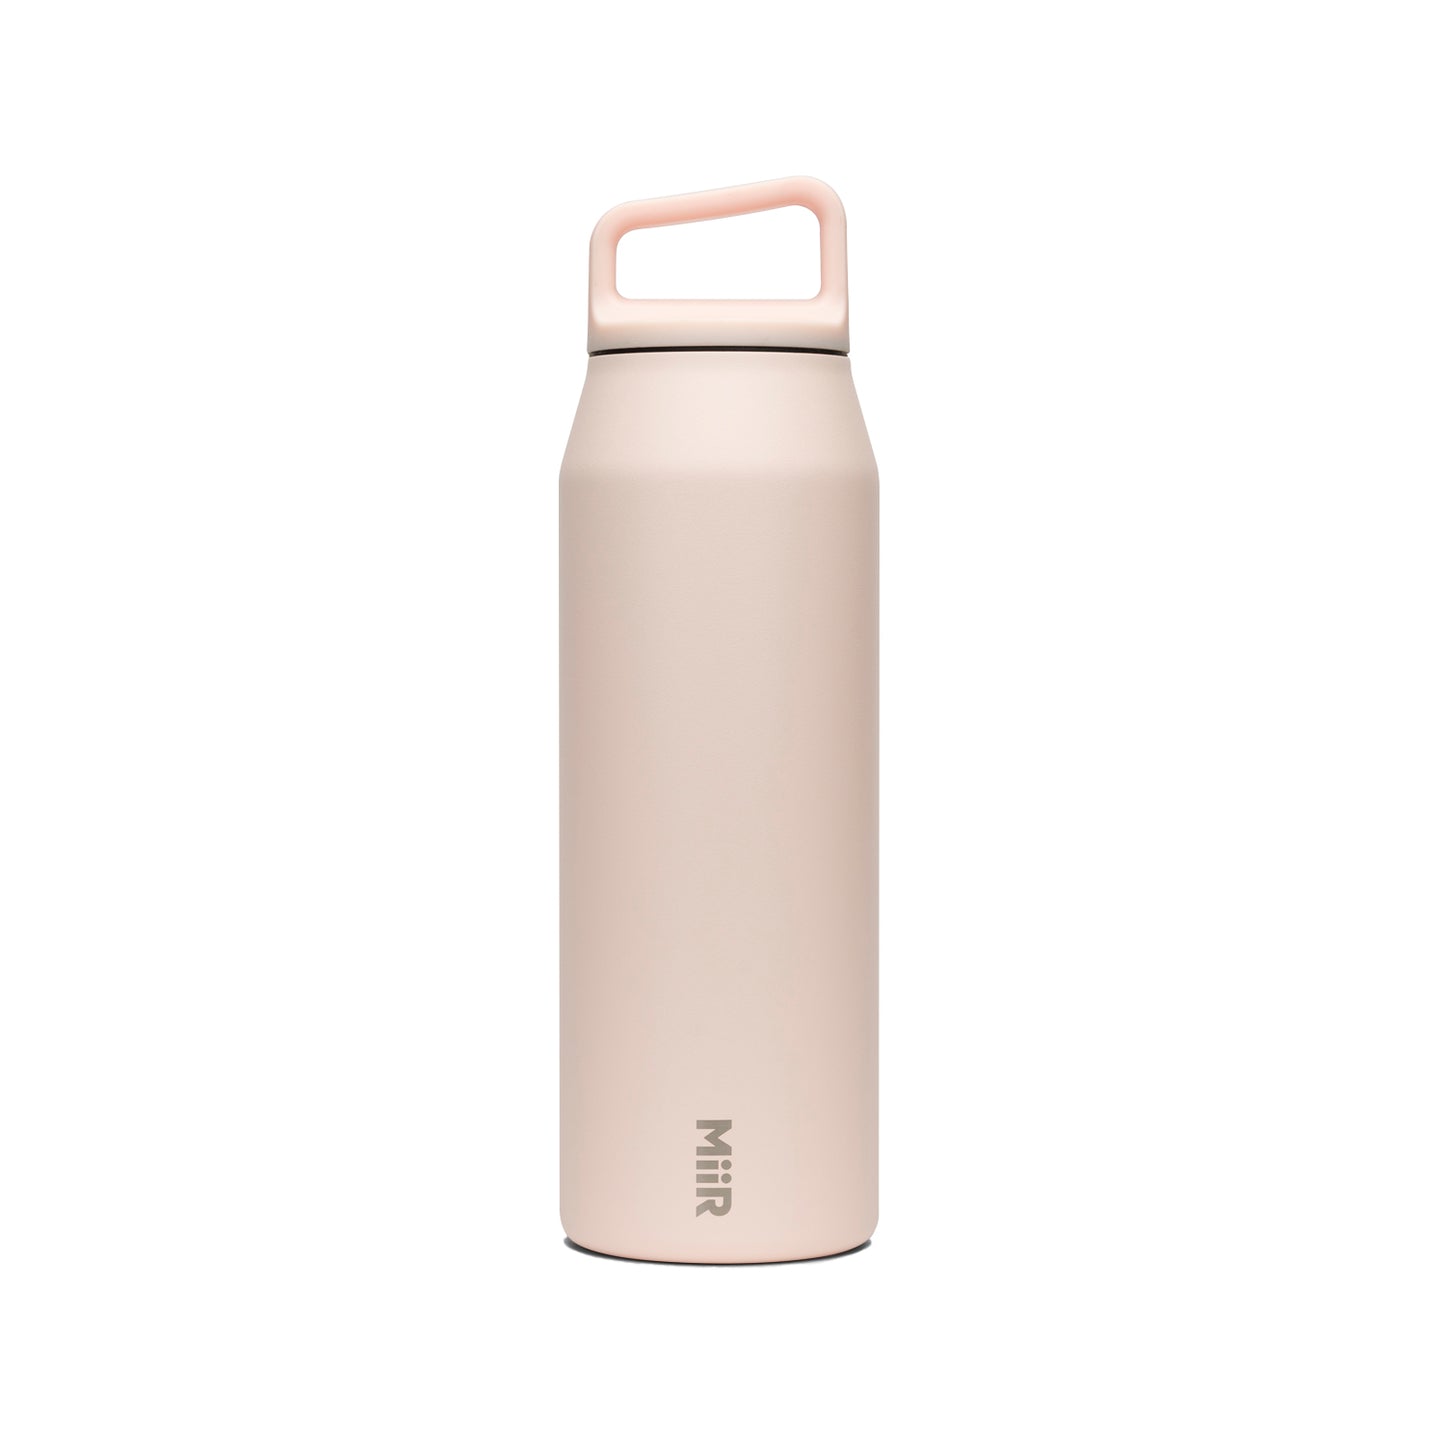 Thermos Stainless Steel Straw Bottle Rose 10 oz